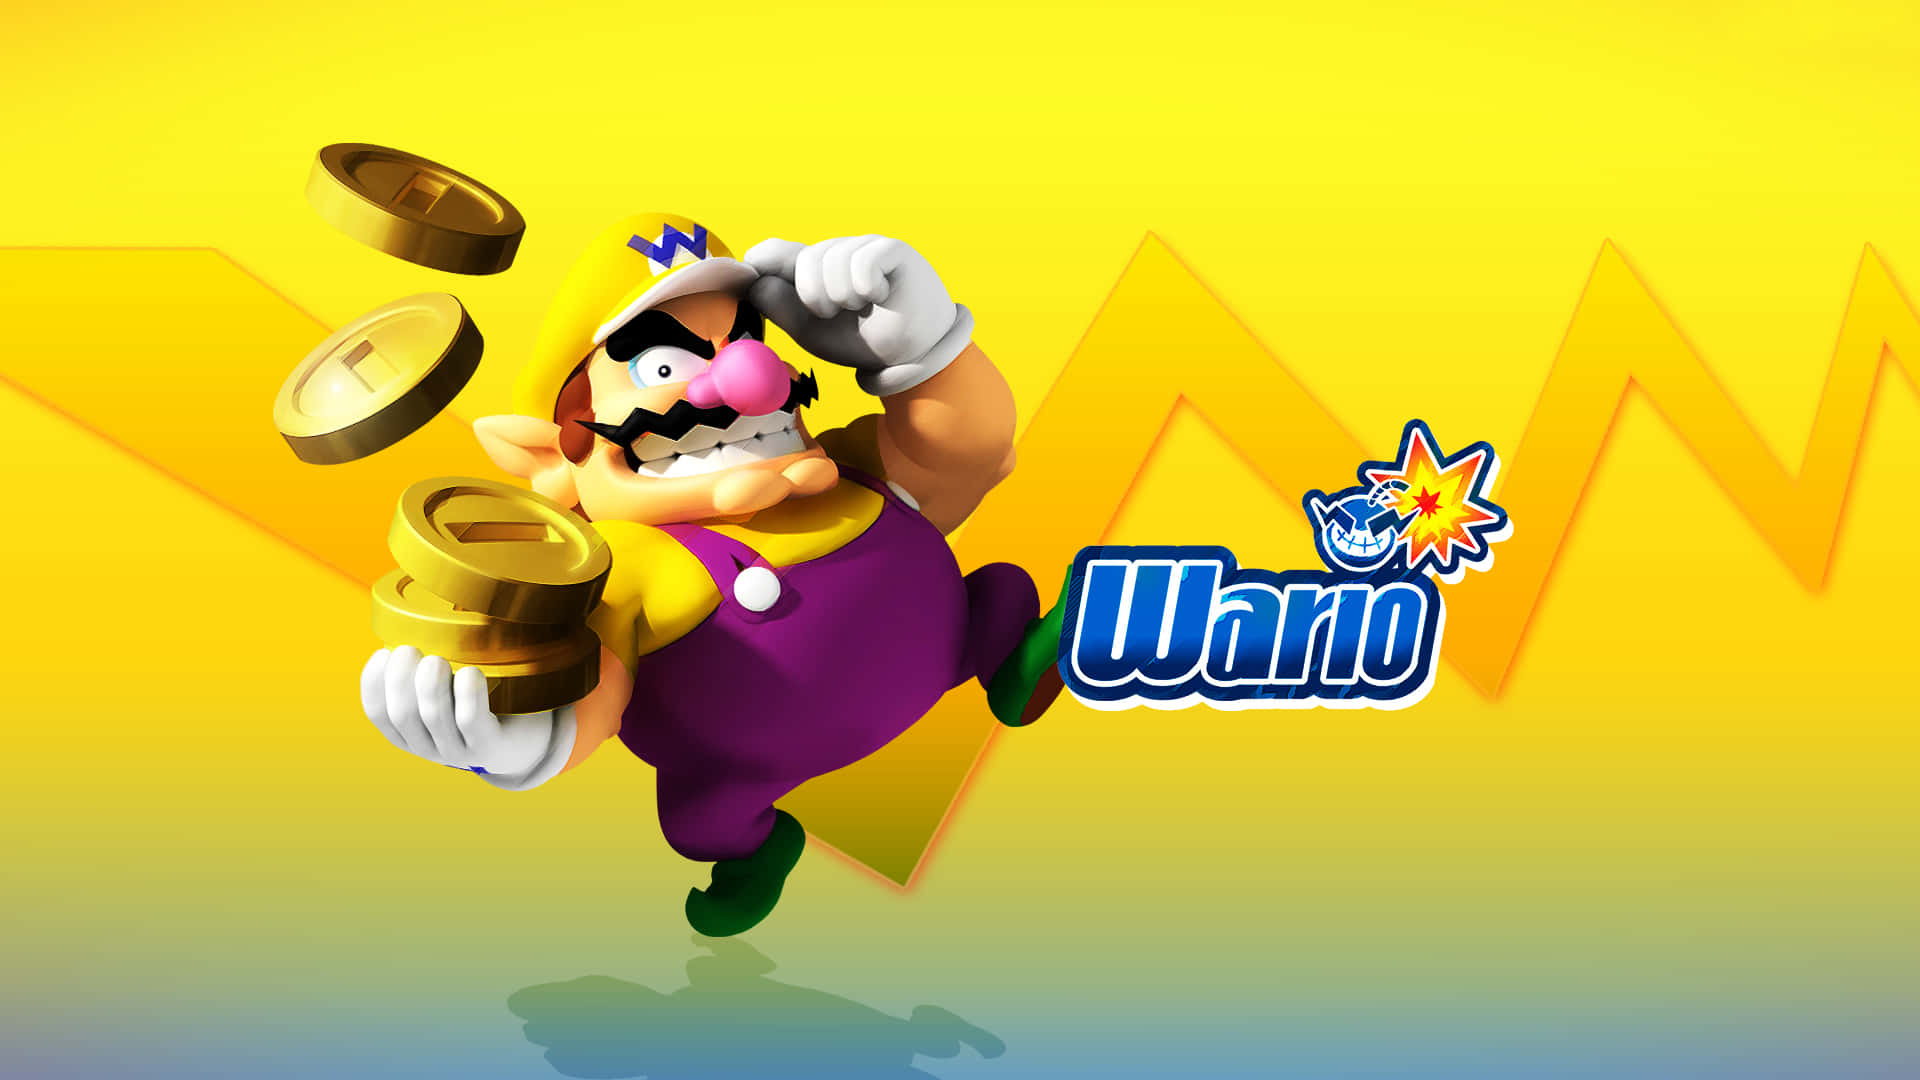 Wario Smirking In A Colorful, Action-packed Background